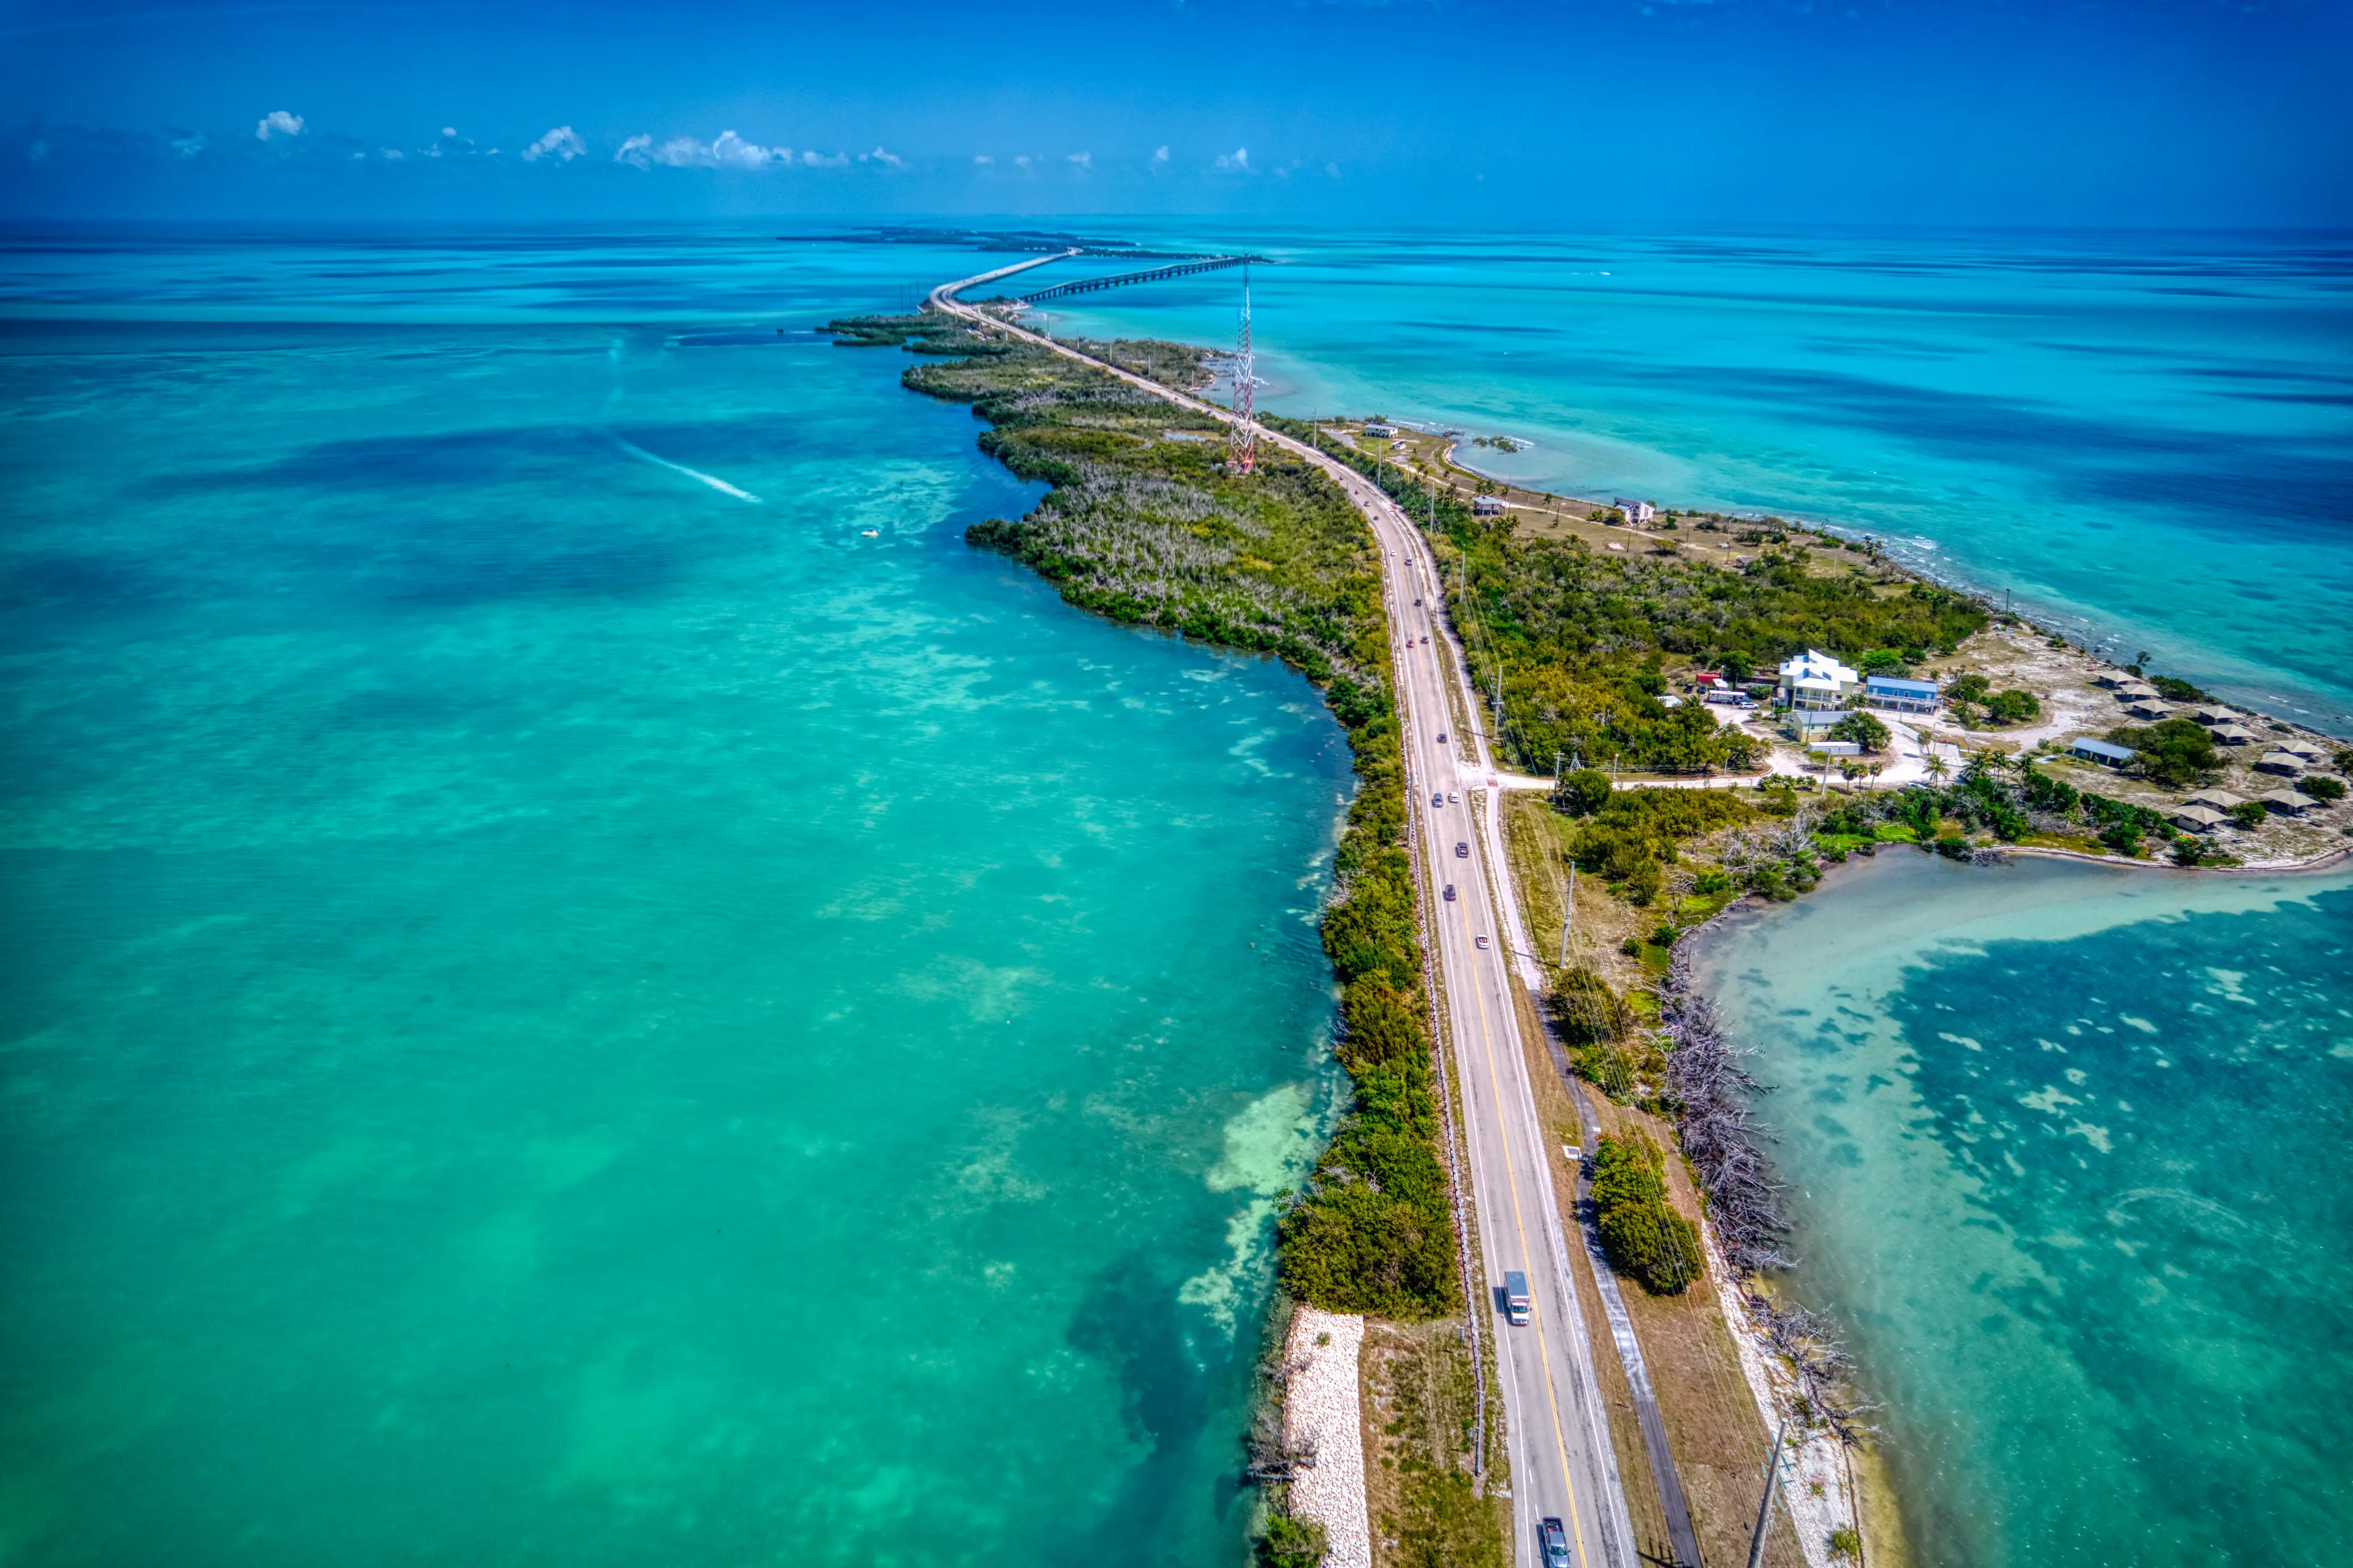 Drone shot of the Overseas Highway in the Florida Keys